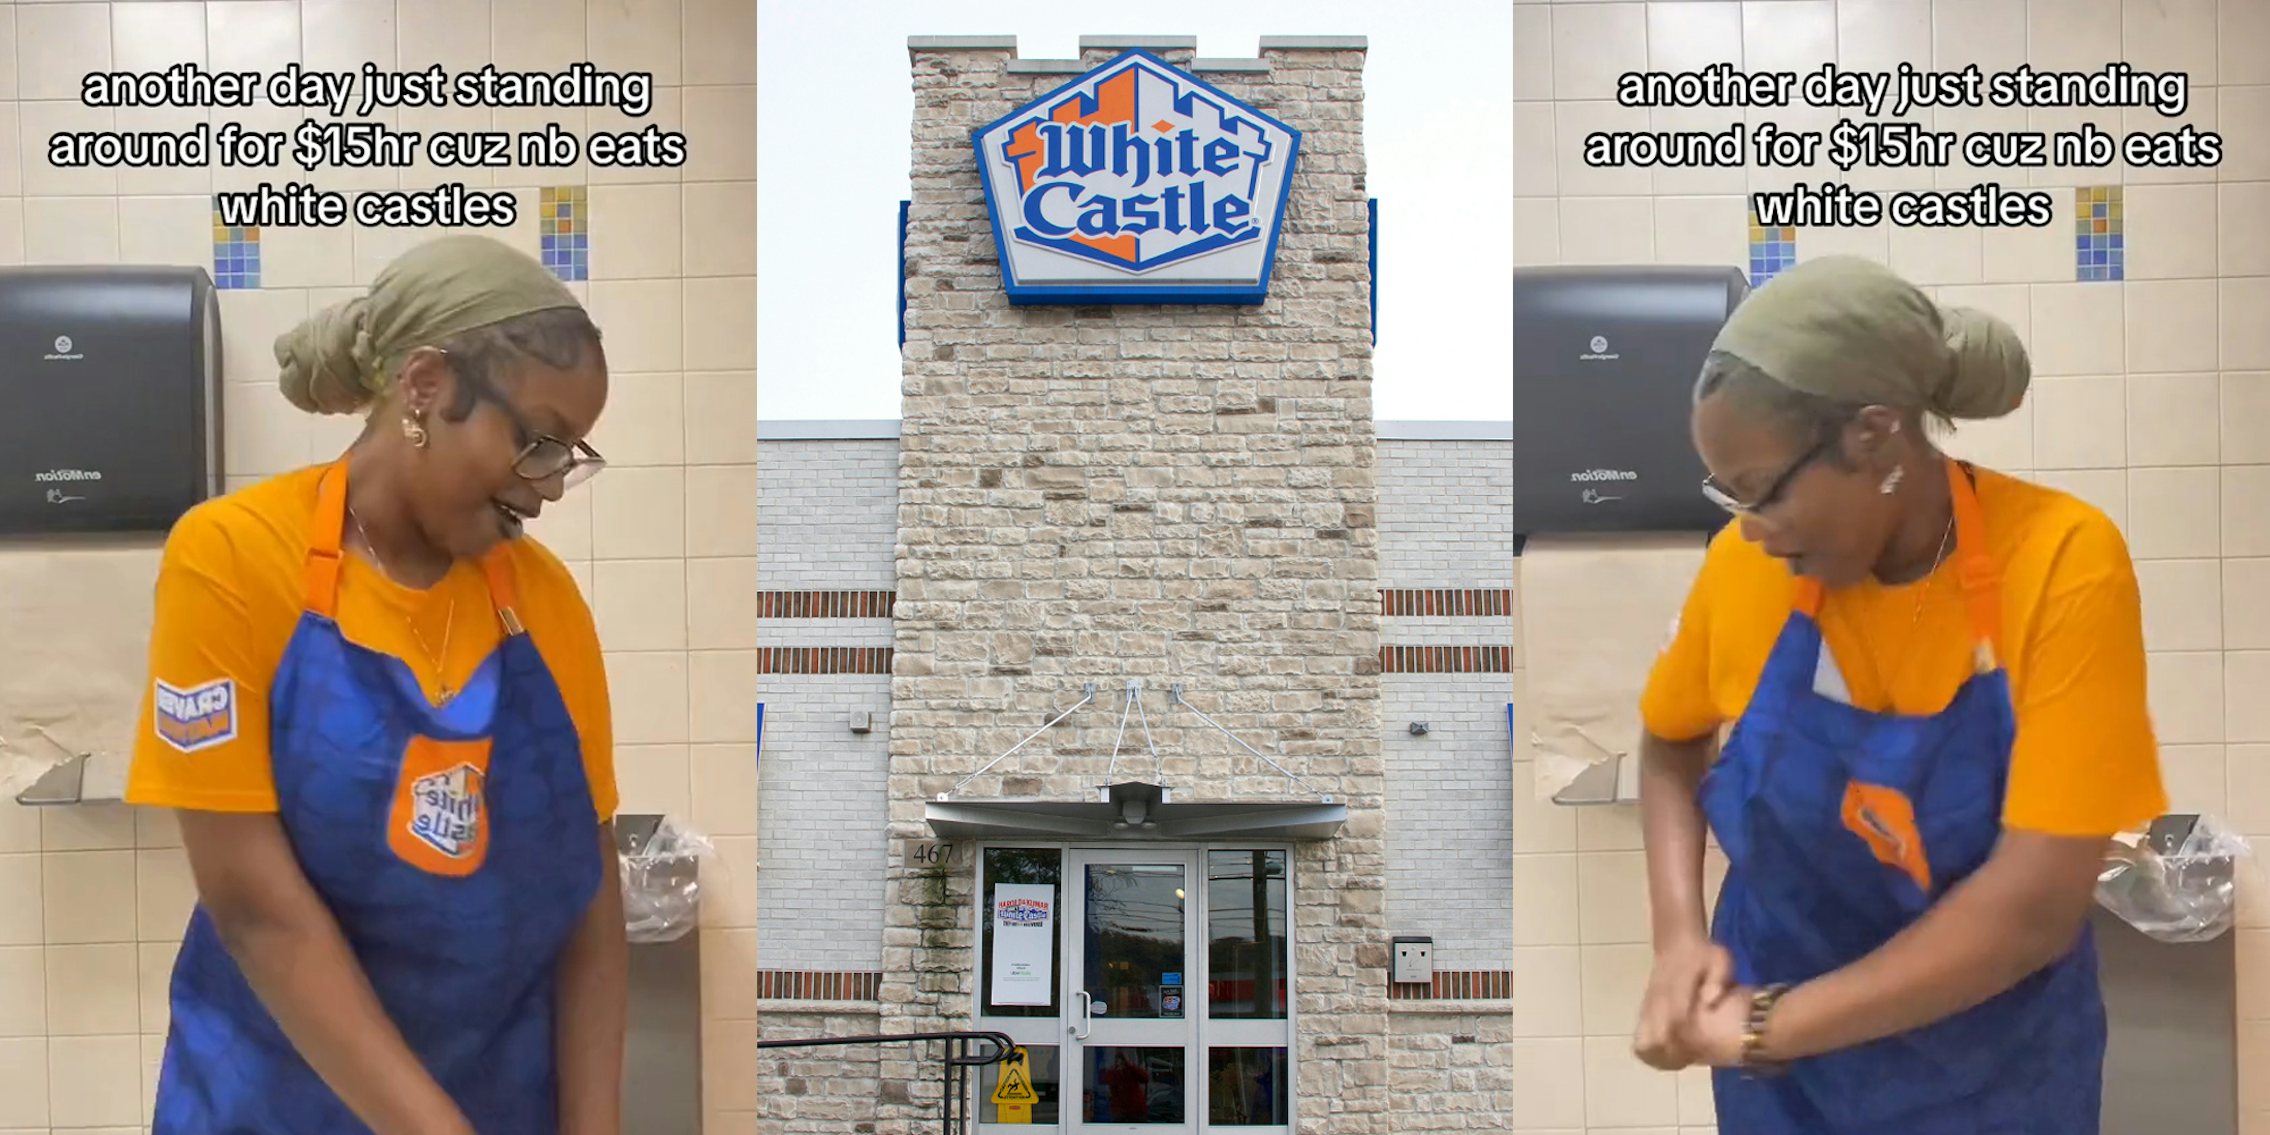 White Castle worker dancing with caption 'another day just standing around for $15hr cuz nb eats white castles' (l) White Castle building with sign (c) White Castle worker dancing with caption 'another day just standing around for $15hr cuz nb eats white castles' (r)